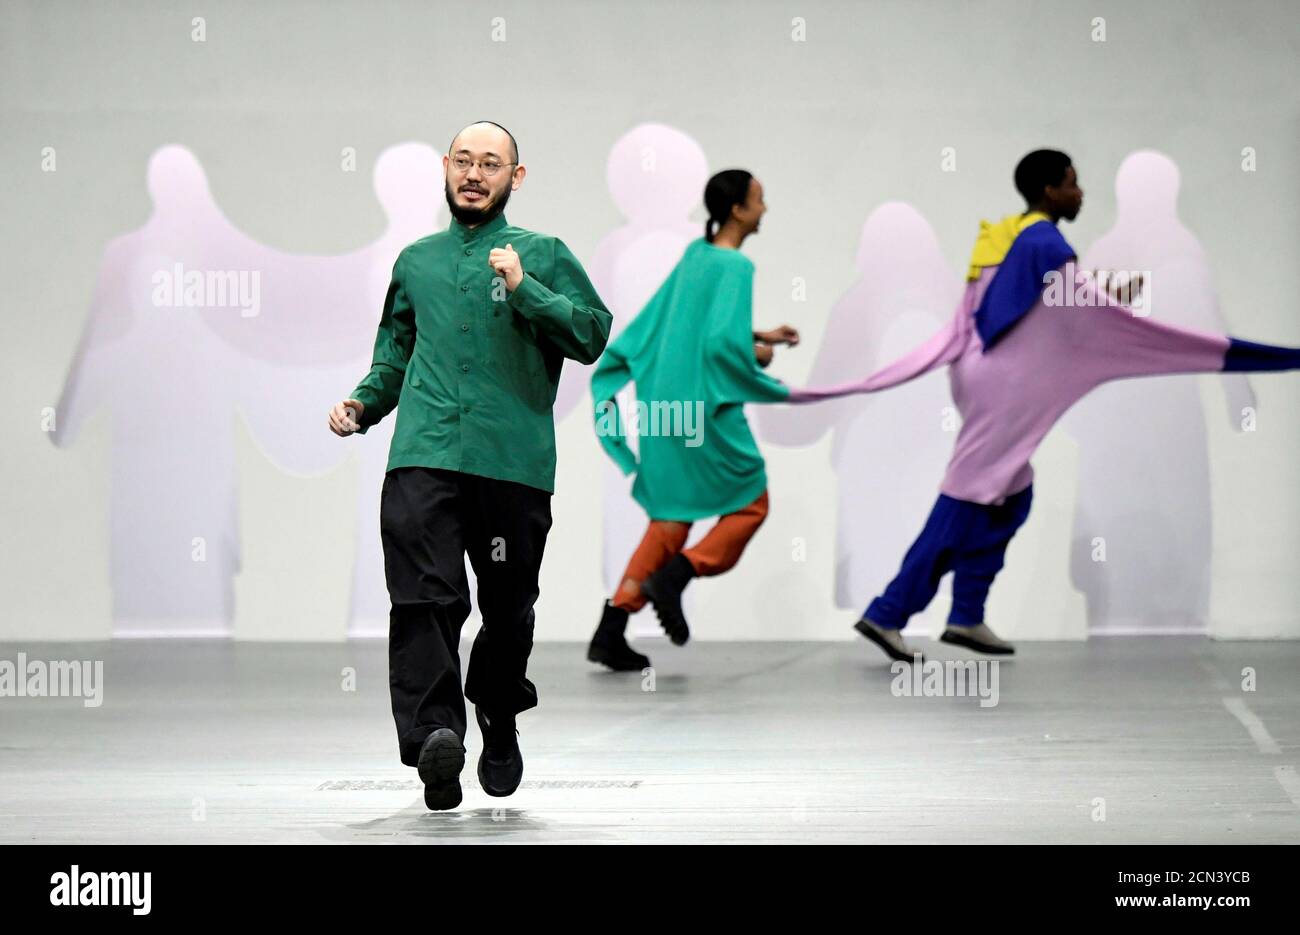 Designer Satoshi Kondo appears at the end of his Fall/Winter 2020/21 women's ready-to-wear collection show for fashion house Issey Miyake during Paris Fashion Week in Paris, France, March 1, 2020. REUTERS/Piroschka van de Wouw Stock Photo